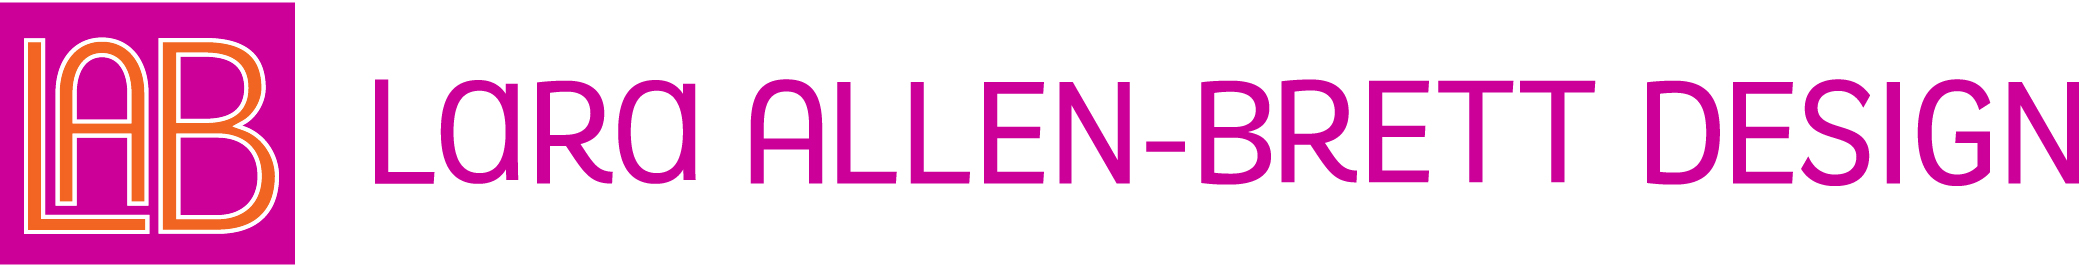 A logo for Lara Allen-Brett Design. On the left is a fuchsia box containing the capital letters LAB in orange outlined with thin white lines. On the right, next to the box, is the business name Lara Allen-Brett Design in sans serif font.